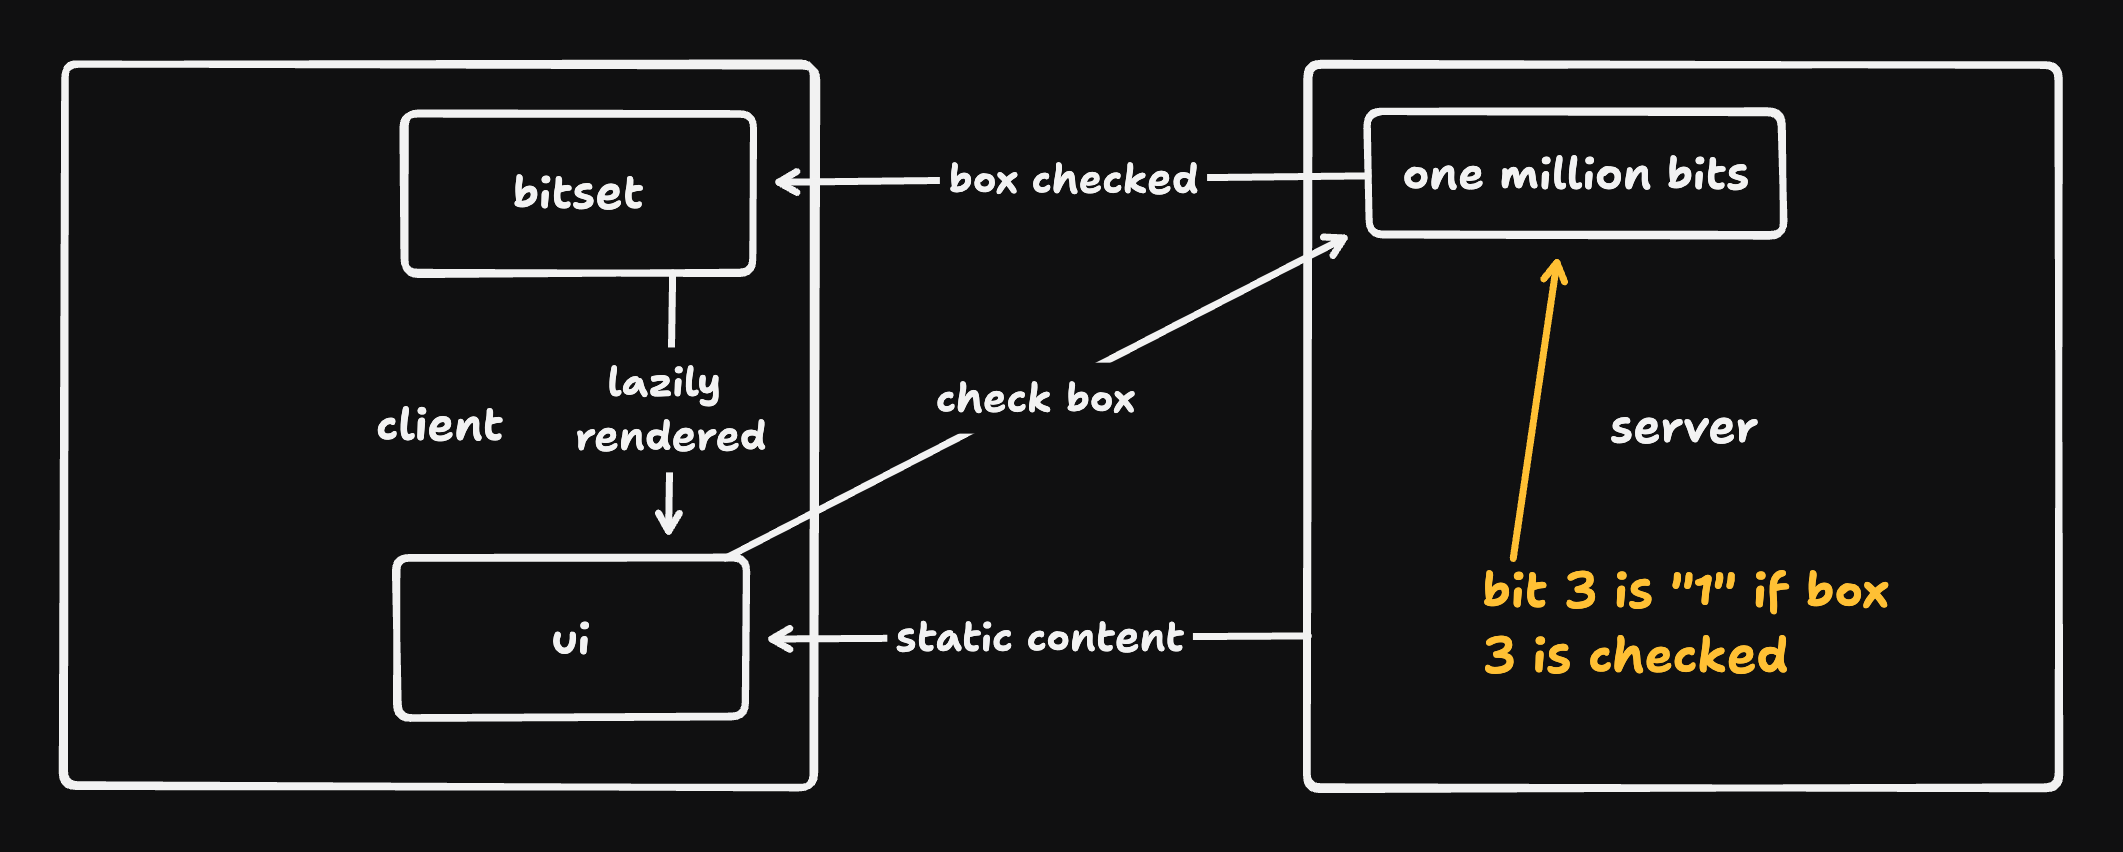 The original architecture of OMCB. The client maintains a bitset tracking which boxes are checked and renders checkboxes lazily. The server has 1 million bits of state - one for each checkbox. The server flips bit 3 when box 3 is checked or unchecked.